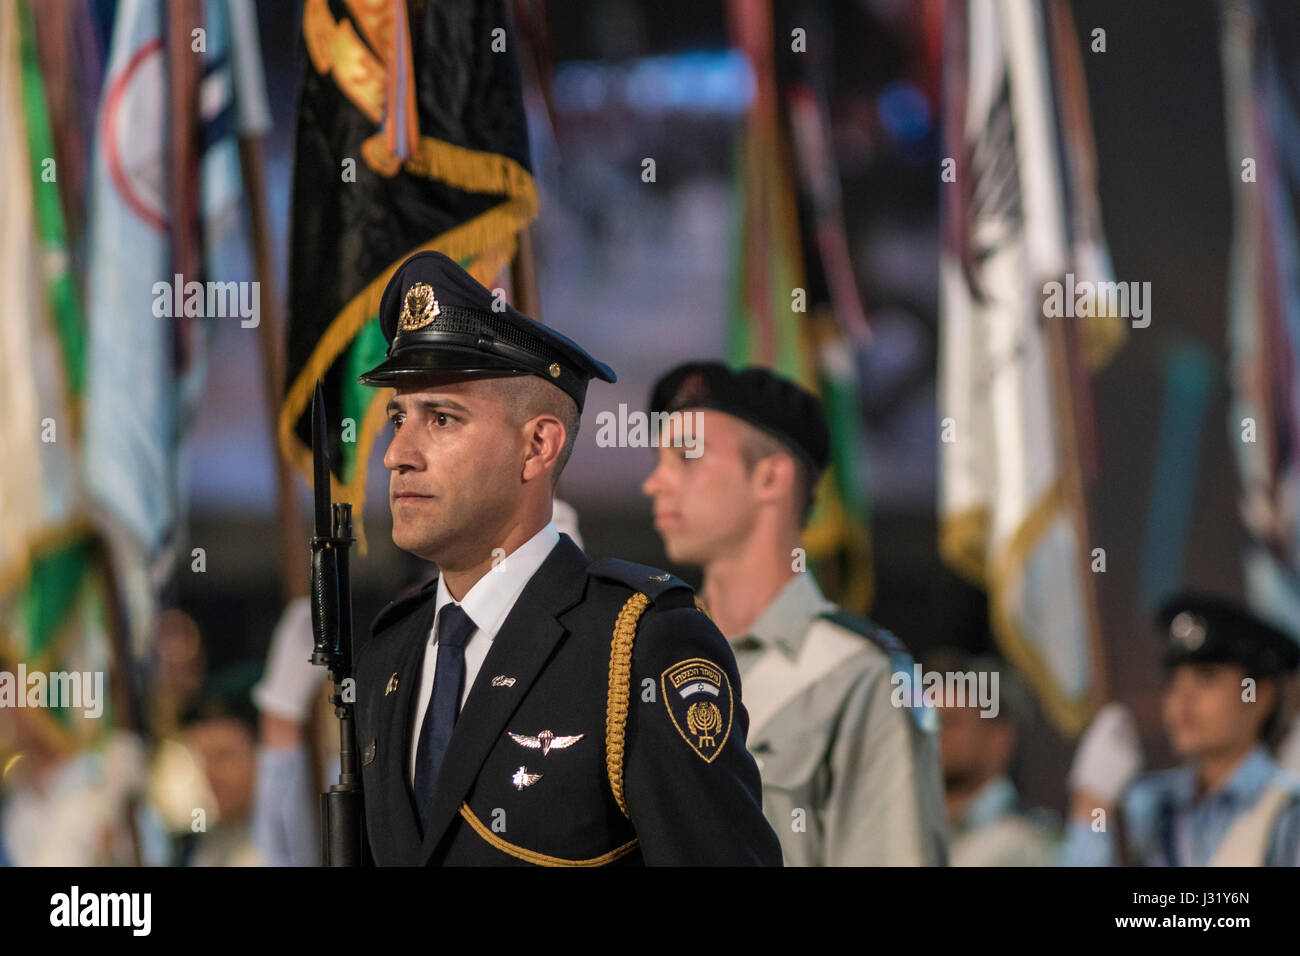 Jerusalem, Israel. Members of the security guard of the Knesset - the Israeli Parliament - perform drills and guard of honor with fixed bayonet during the central ceremony of Israel's 69th independence day. the ceremony takes place at the edge of the Mount Herzl National cemetery. Stock Photo